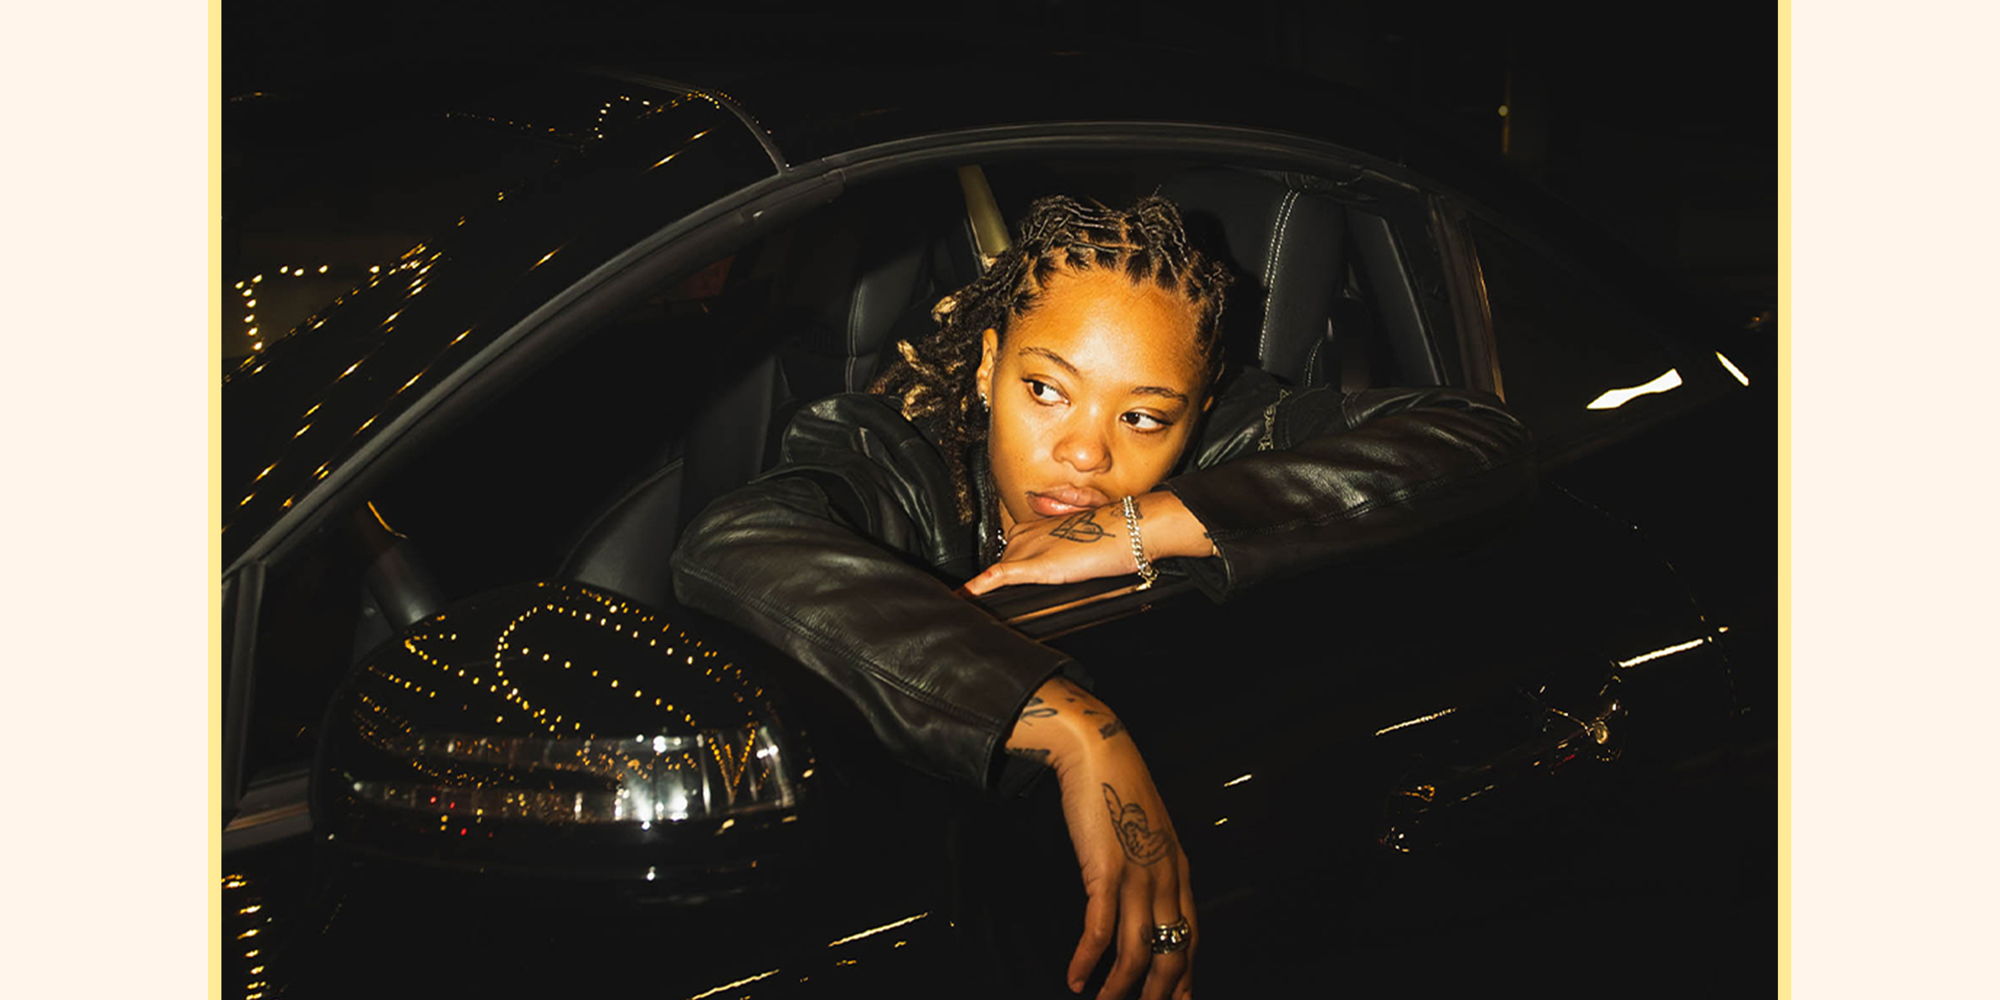 Empire Presents: Kodie Shane at Empire Control Room on 3/29 promotional image